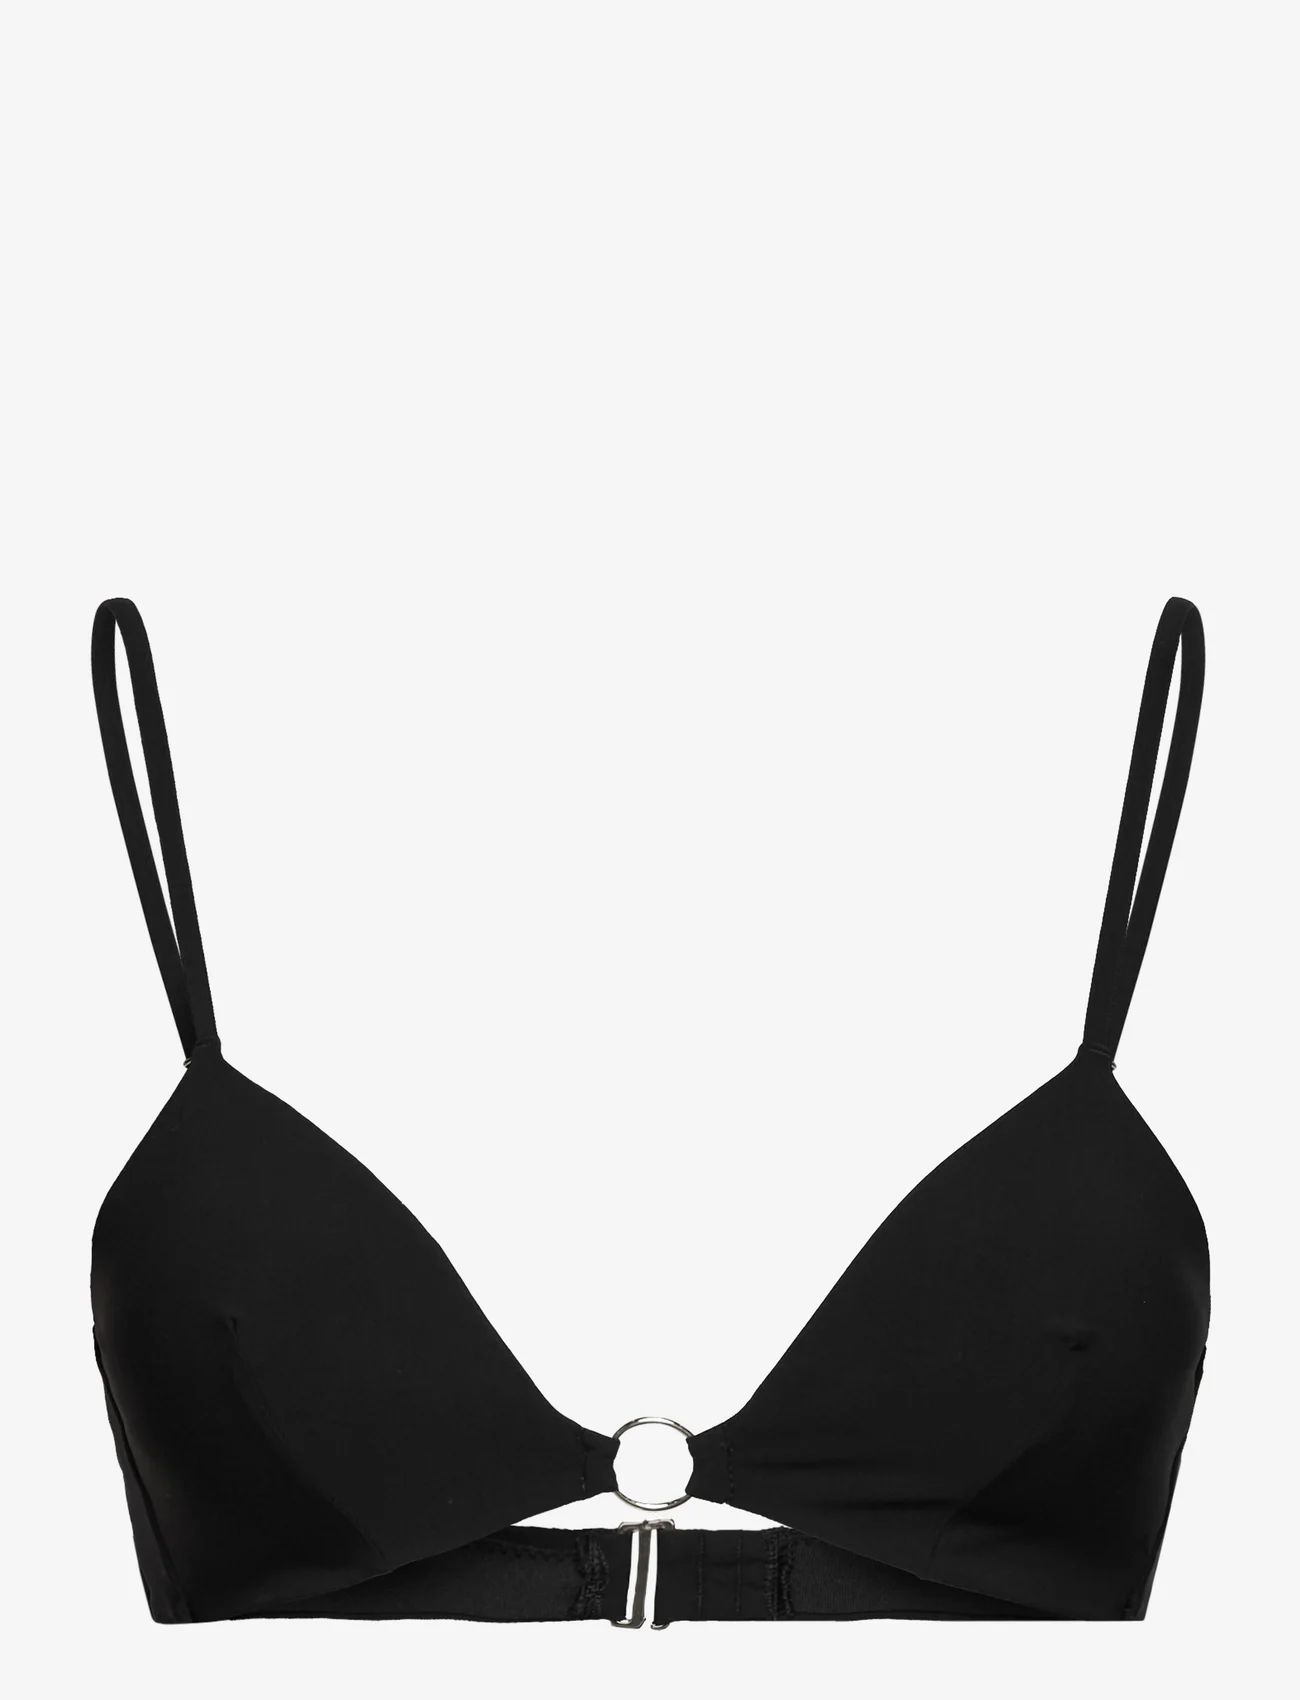 Calvin Klein - TRIANGLE MOULDED CUP - triangelformad bikinis - pvh black - 0